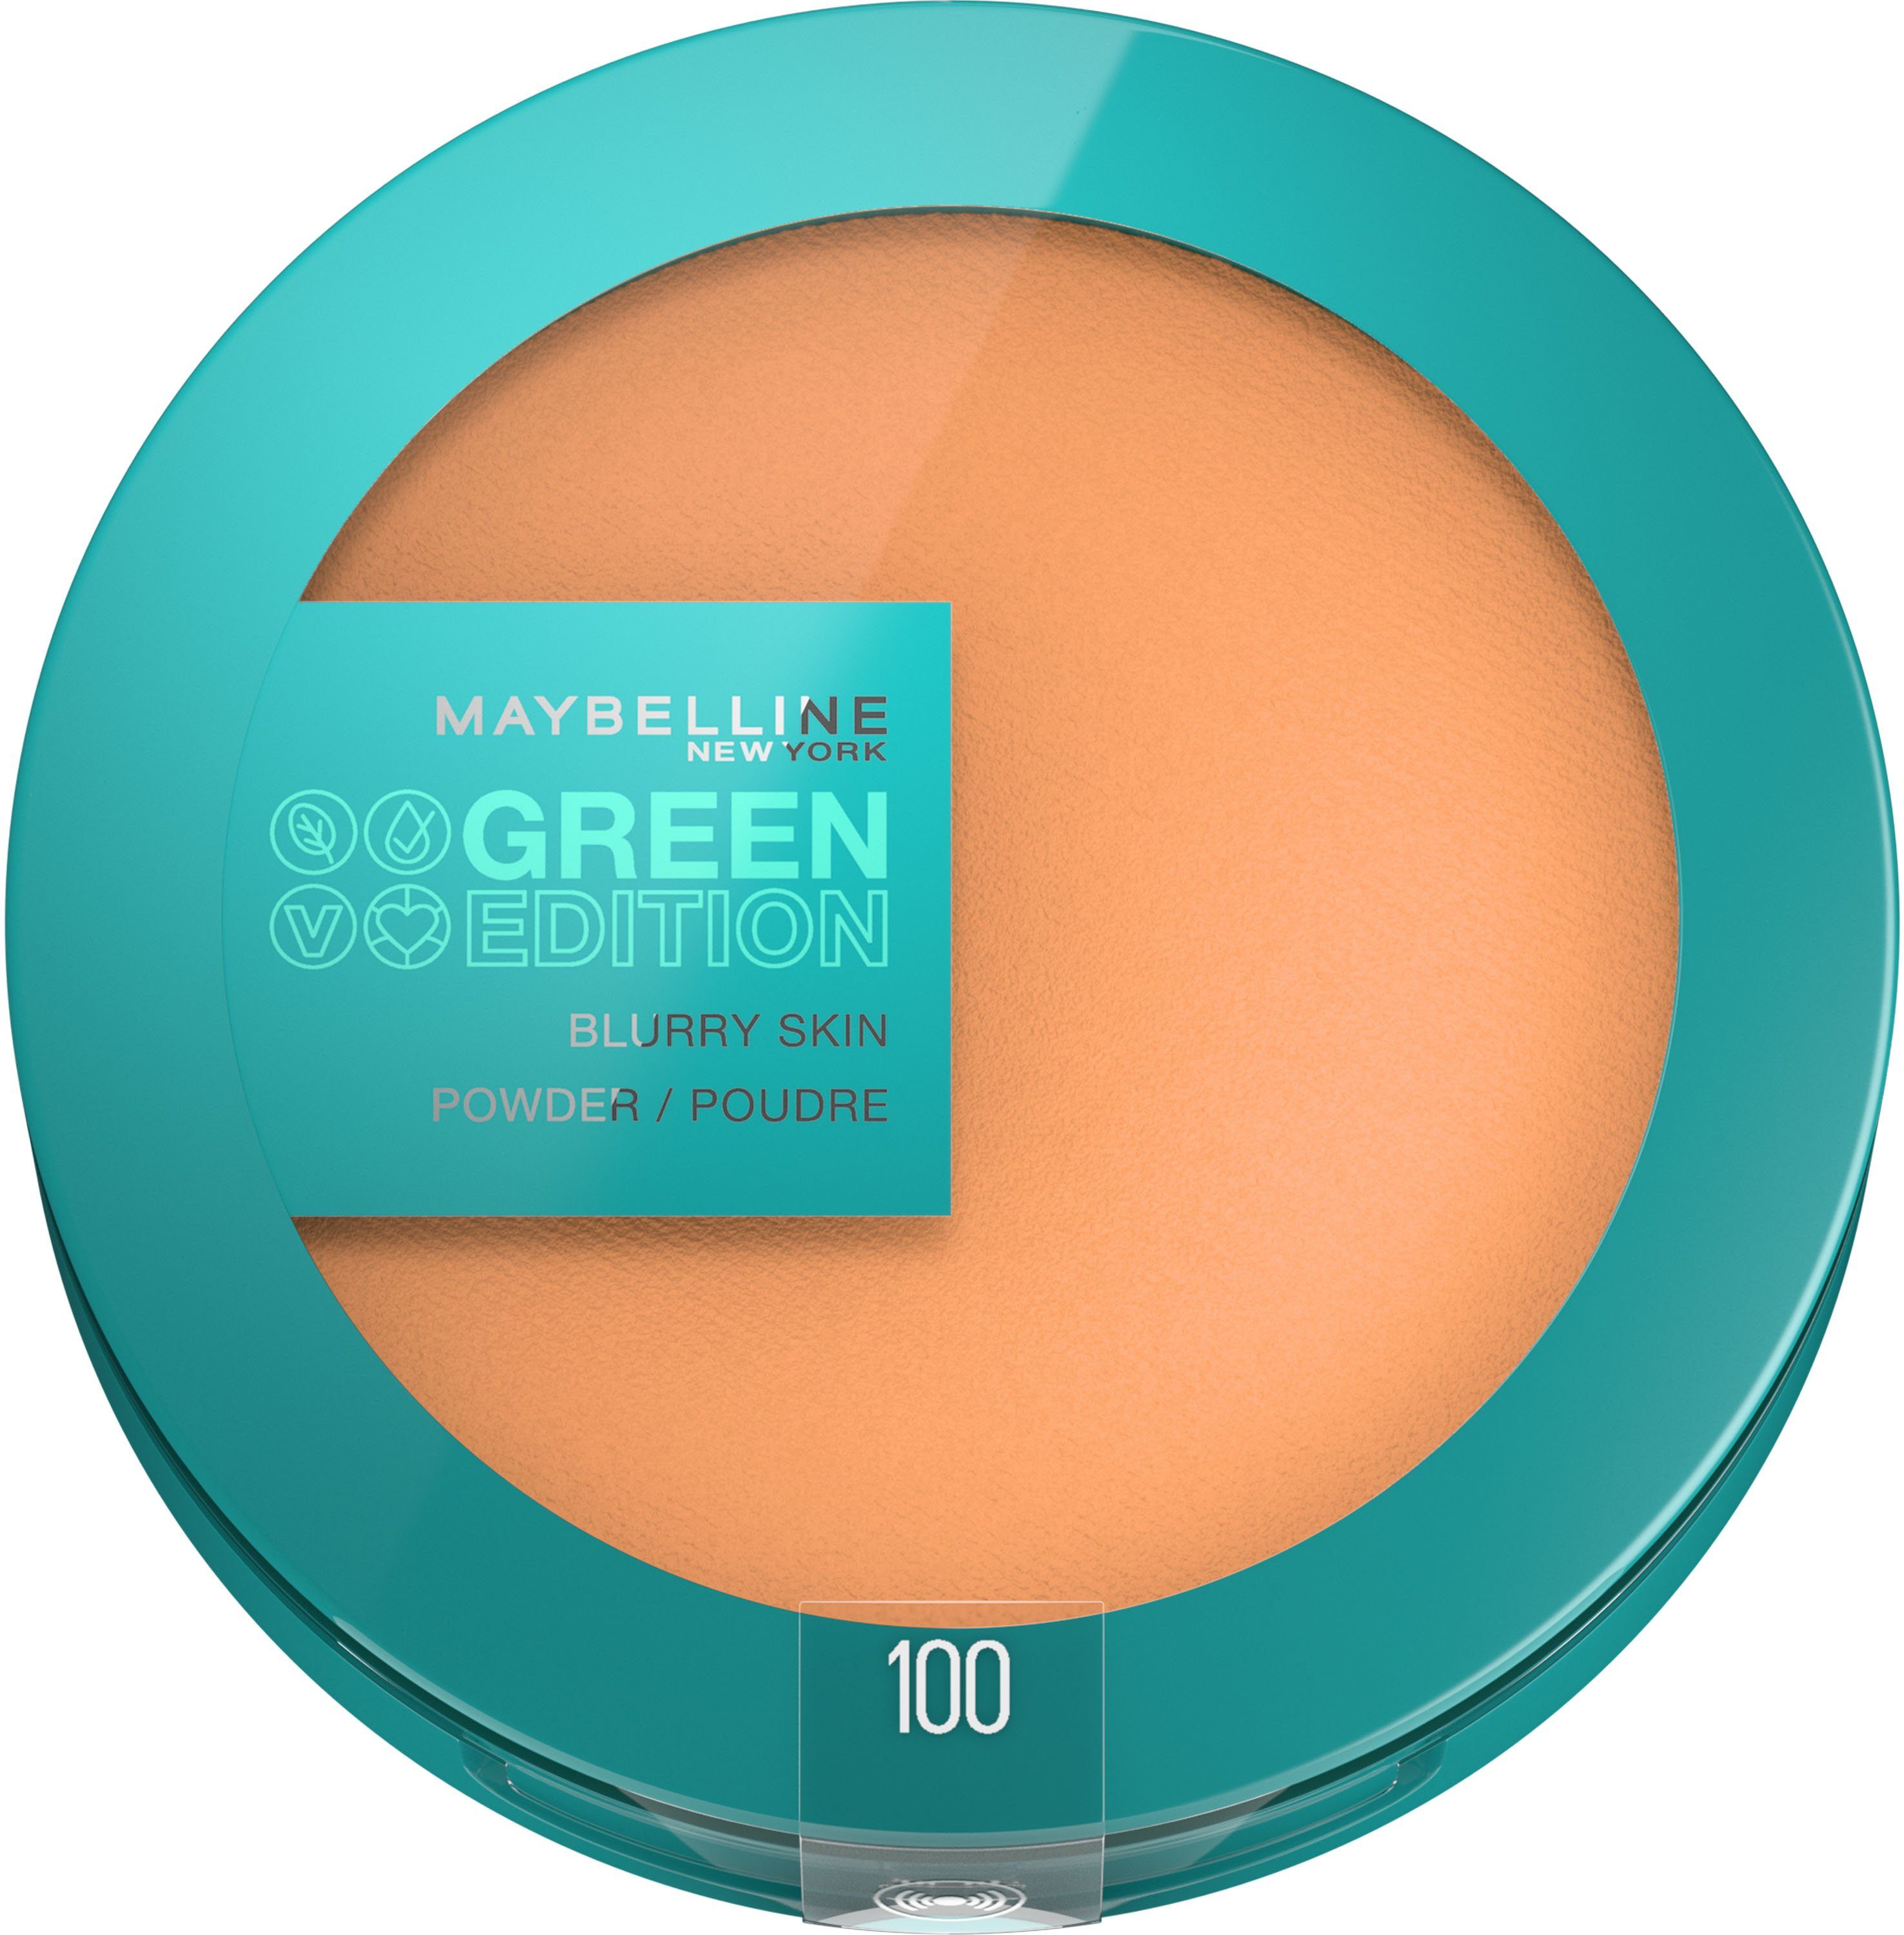 ED GREEN Puder Edition Puder YORK POWDER MAYBELLINE 100 Green NEW